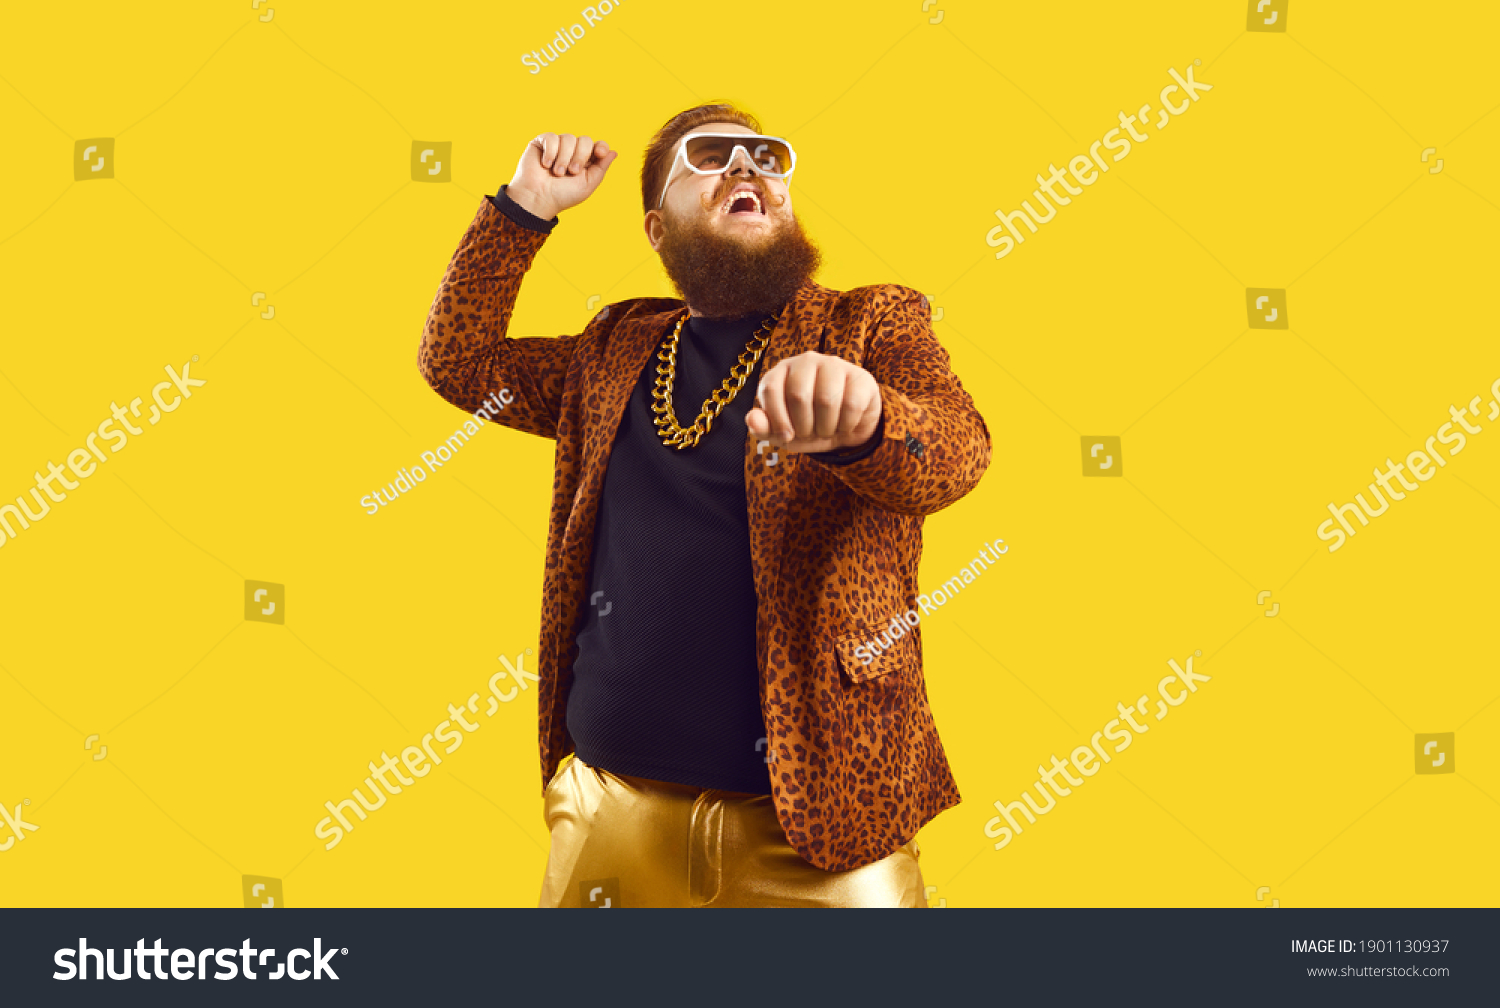 Happy funny plump young man singing songs and dancing gangnam style at a party. Funky redhead chubby guy having fun and doing rope dance move like cowboy with lasso isolated on amber color background #1901130937